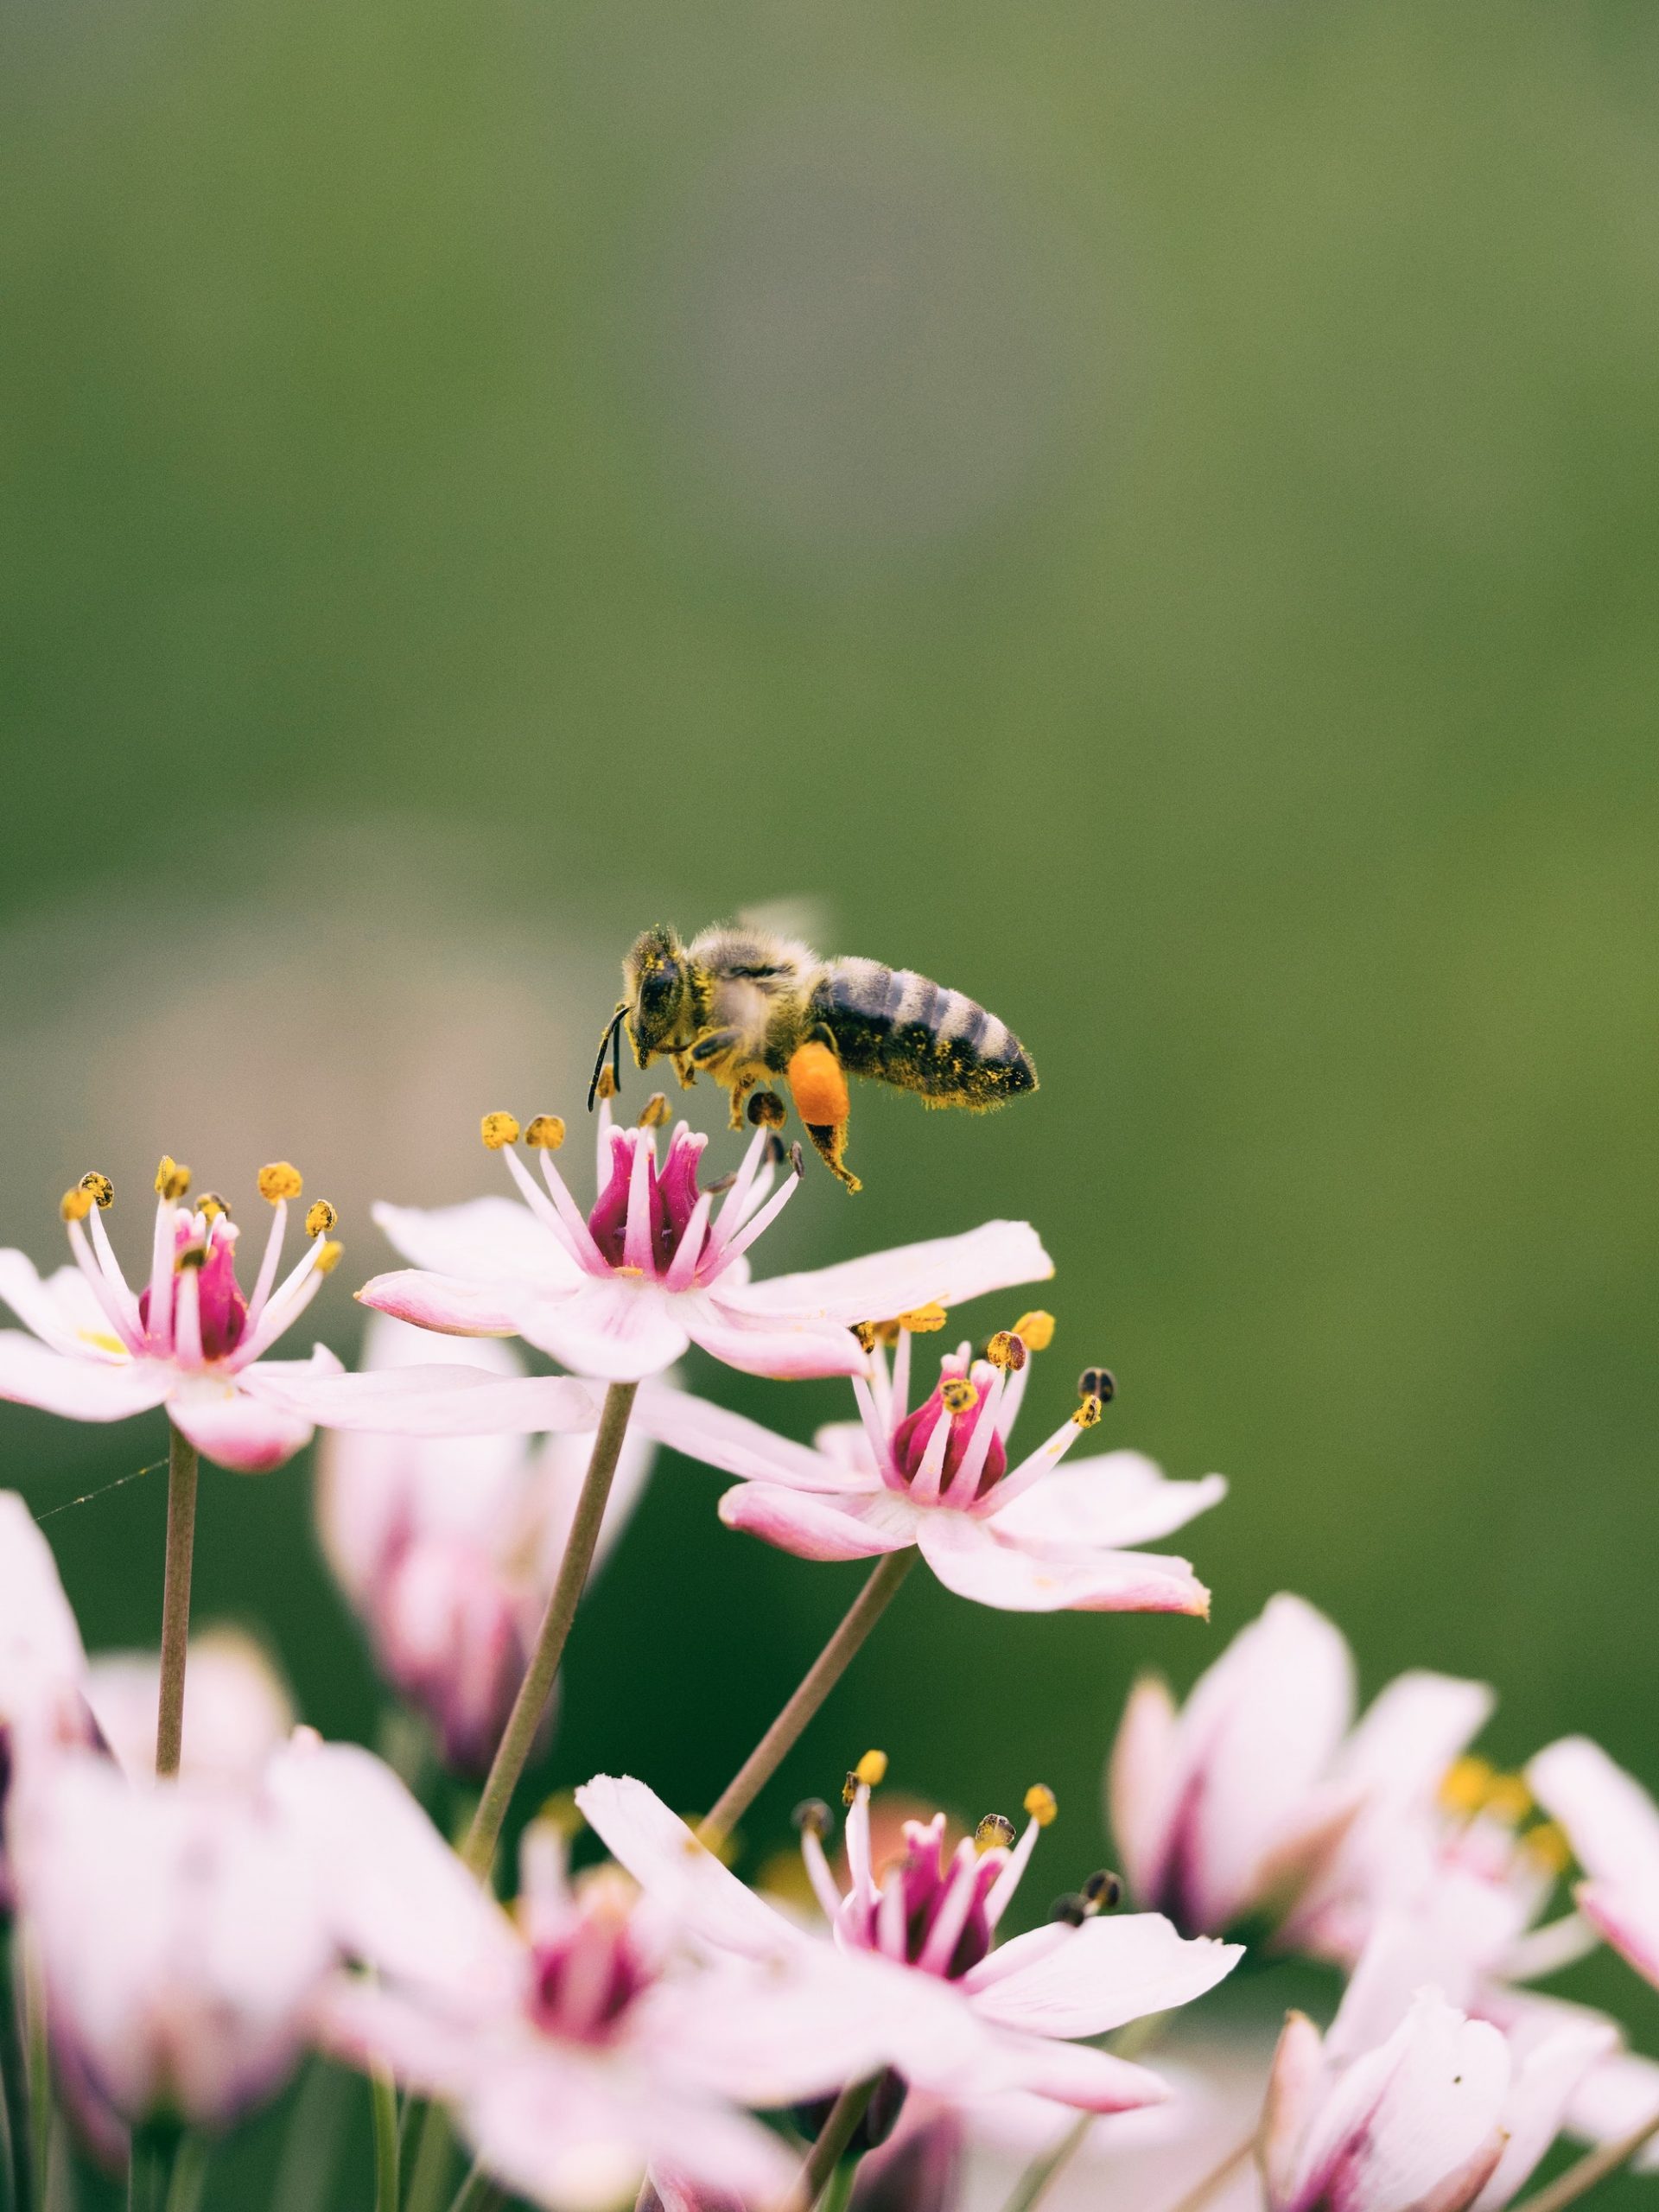 Saving a Bee Reminded Me Of the Power of Kindness